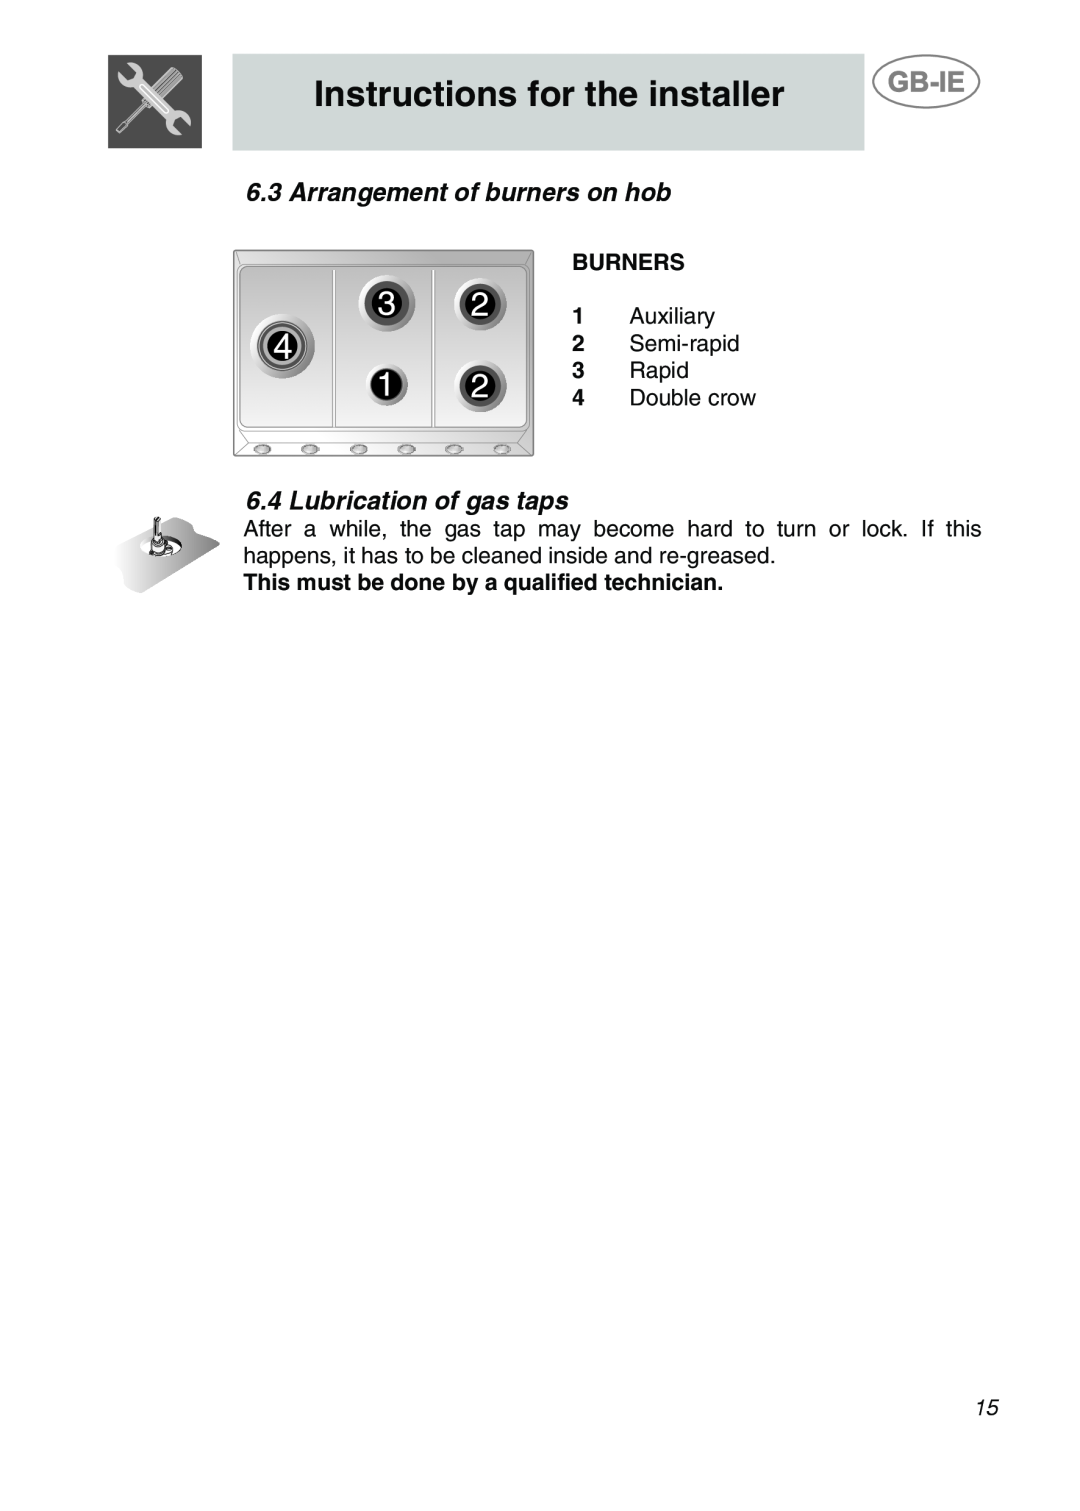 Smeg GCS90XG Arrangement of burners on hob, Lubrication of gas taps, Instructions for the installer, Burners, Auxiliary 